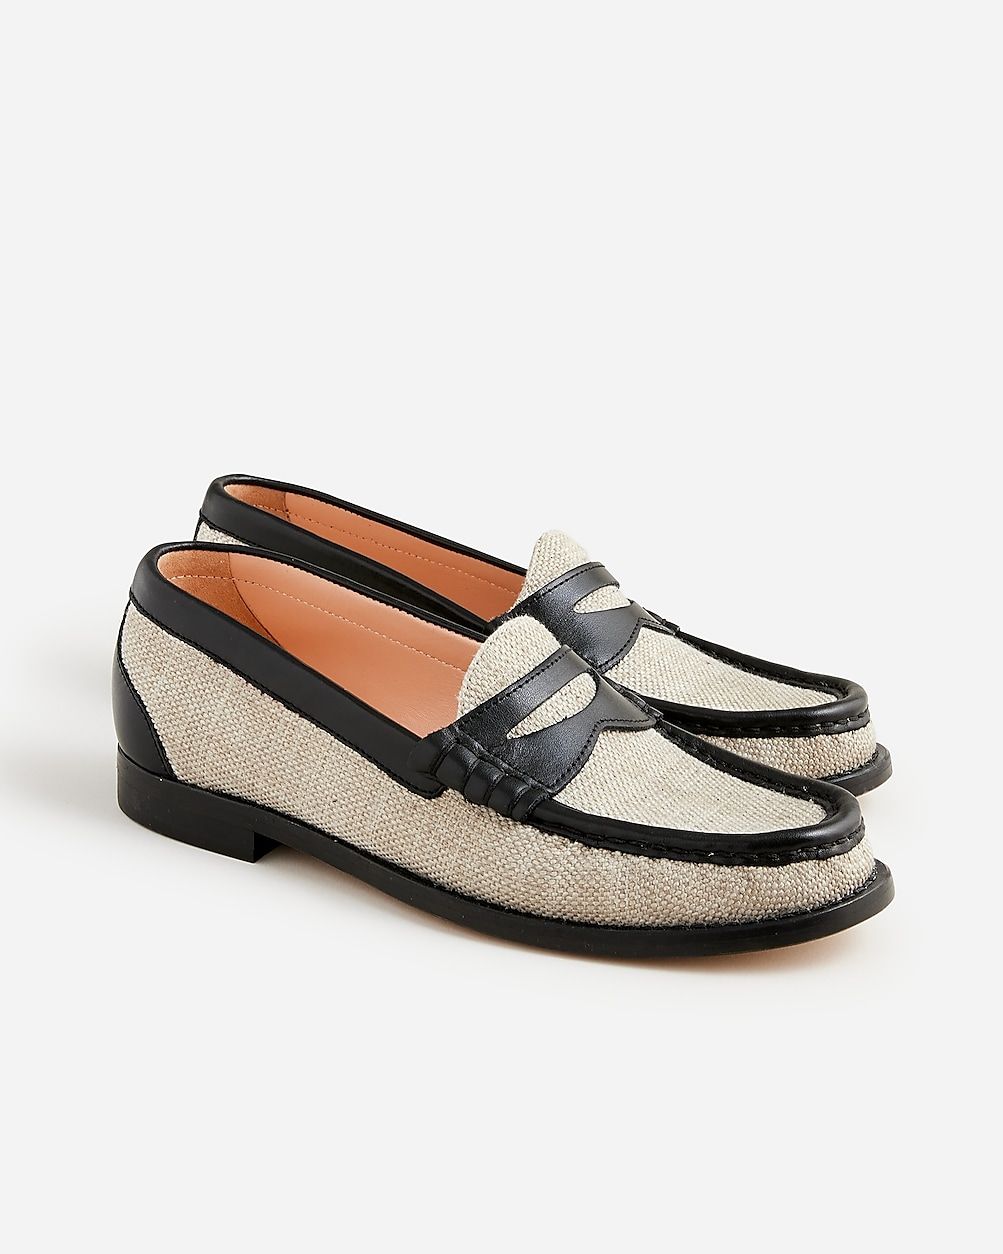 Winona penny loafers in Spanish canvas | J.Crew US